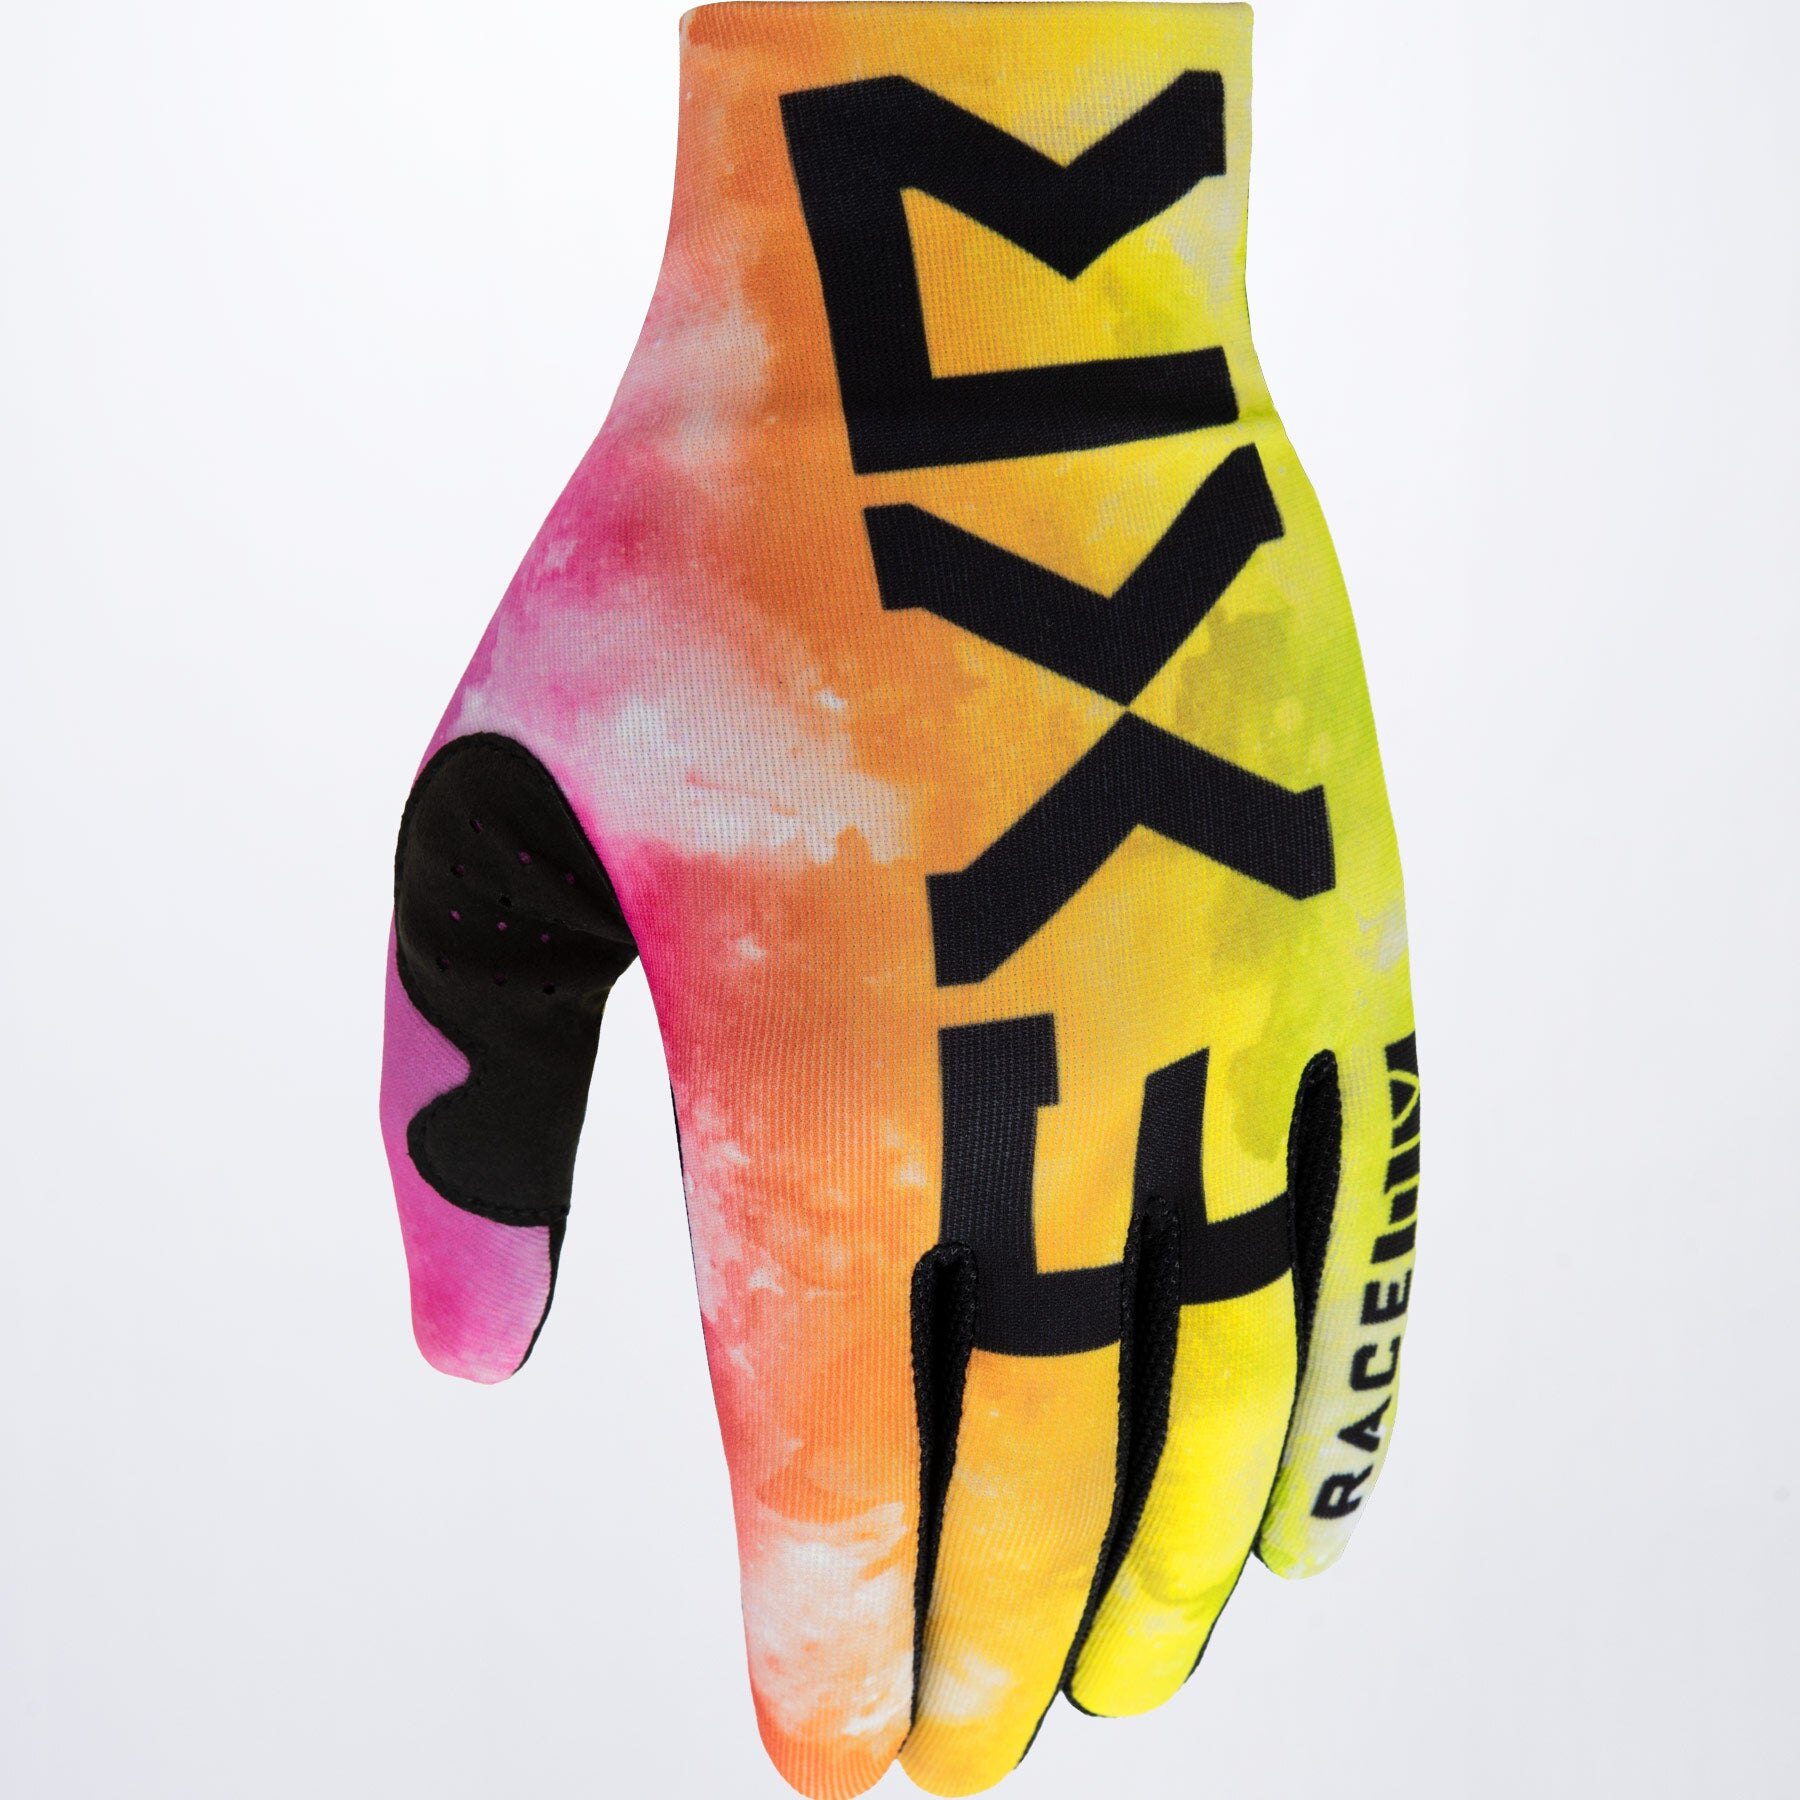 Youth Pro Fit Lite MX Glove